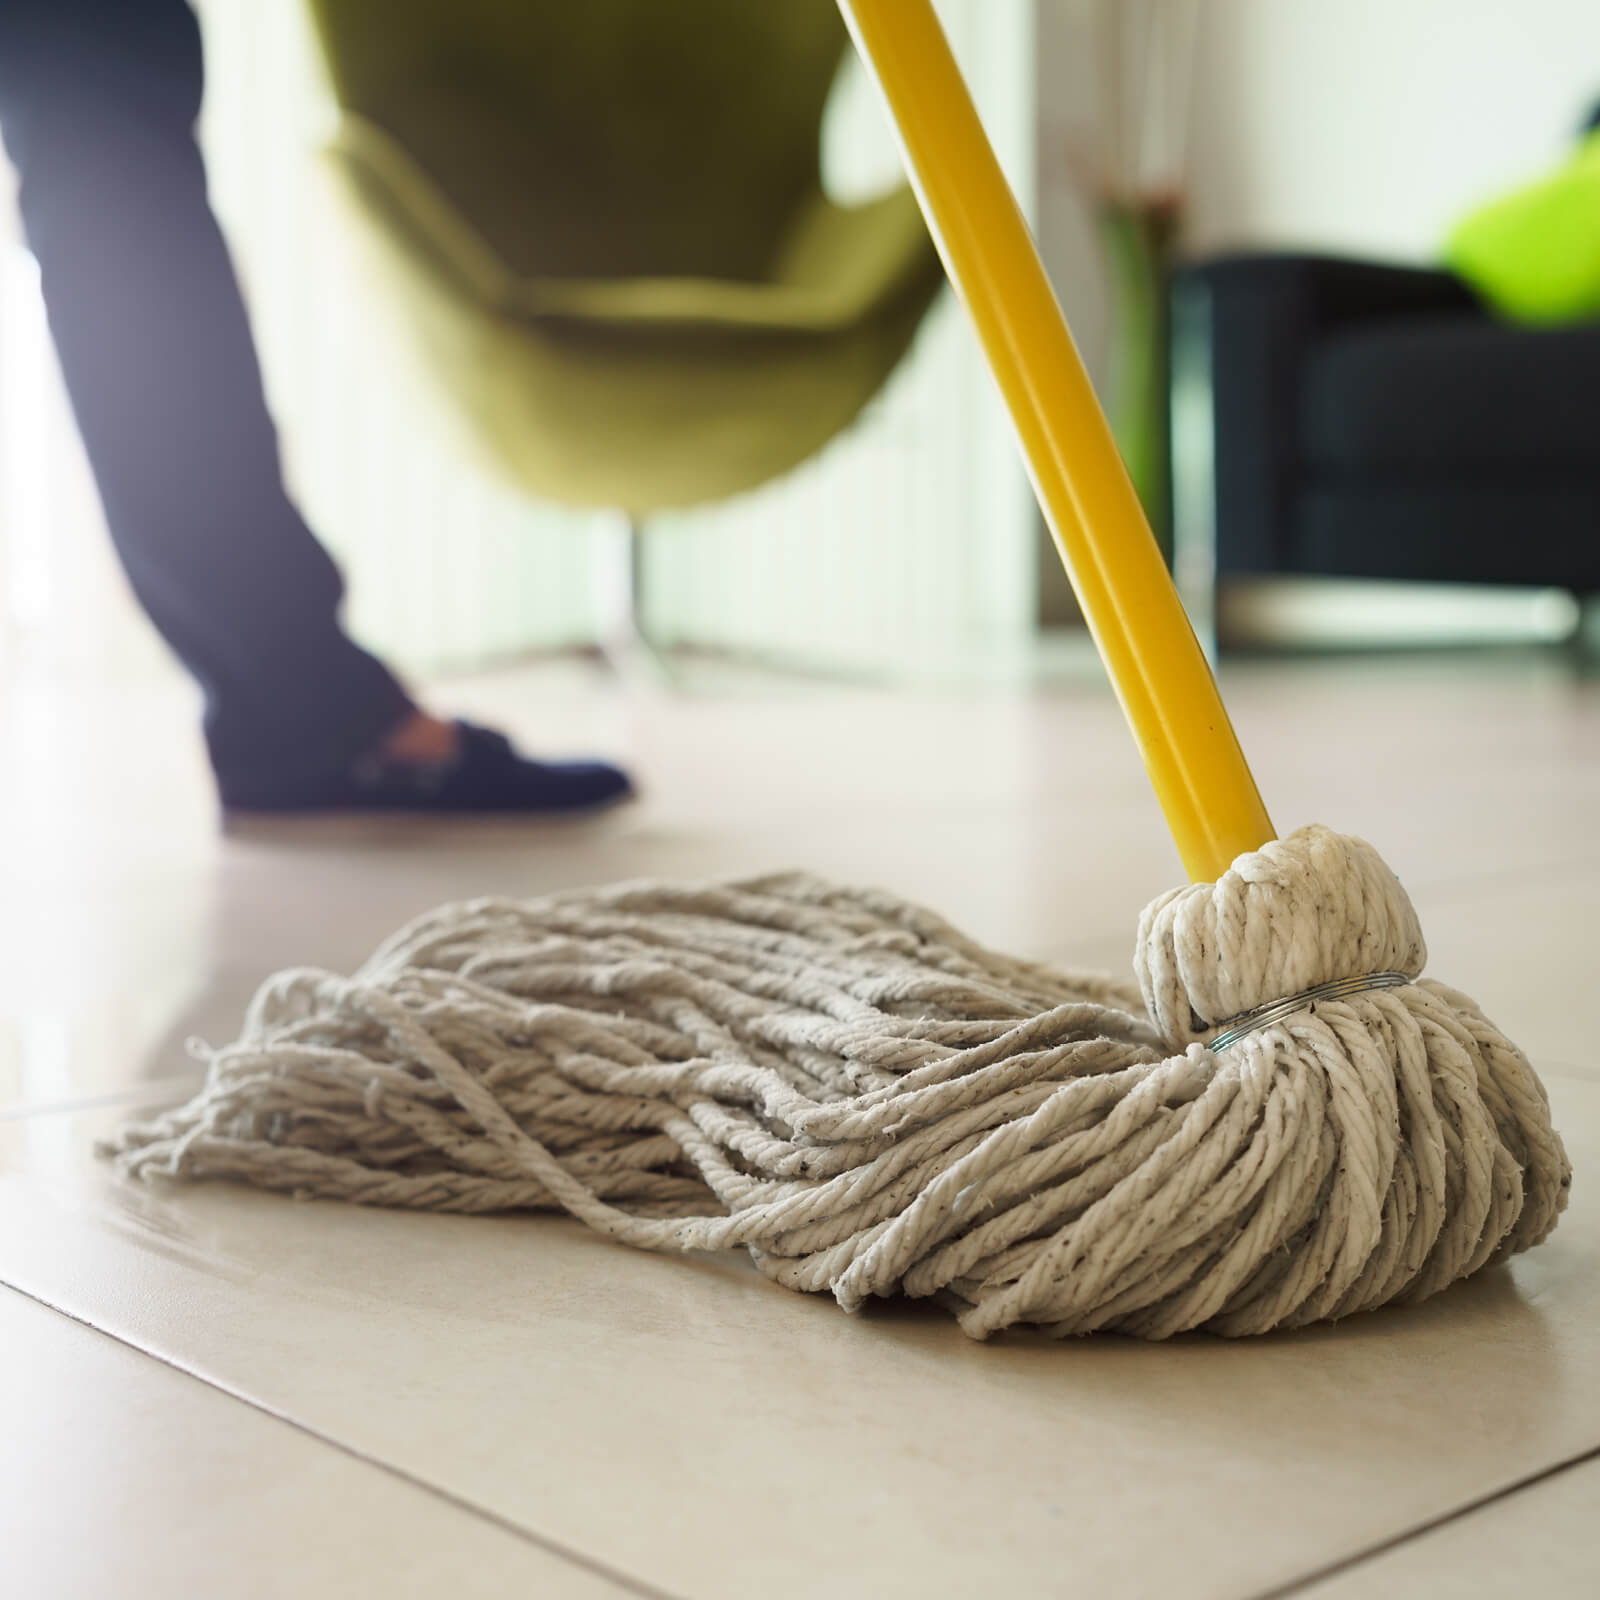 Tile cleaning | Kelly's Carpet Omaha